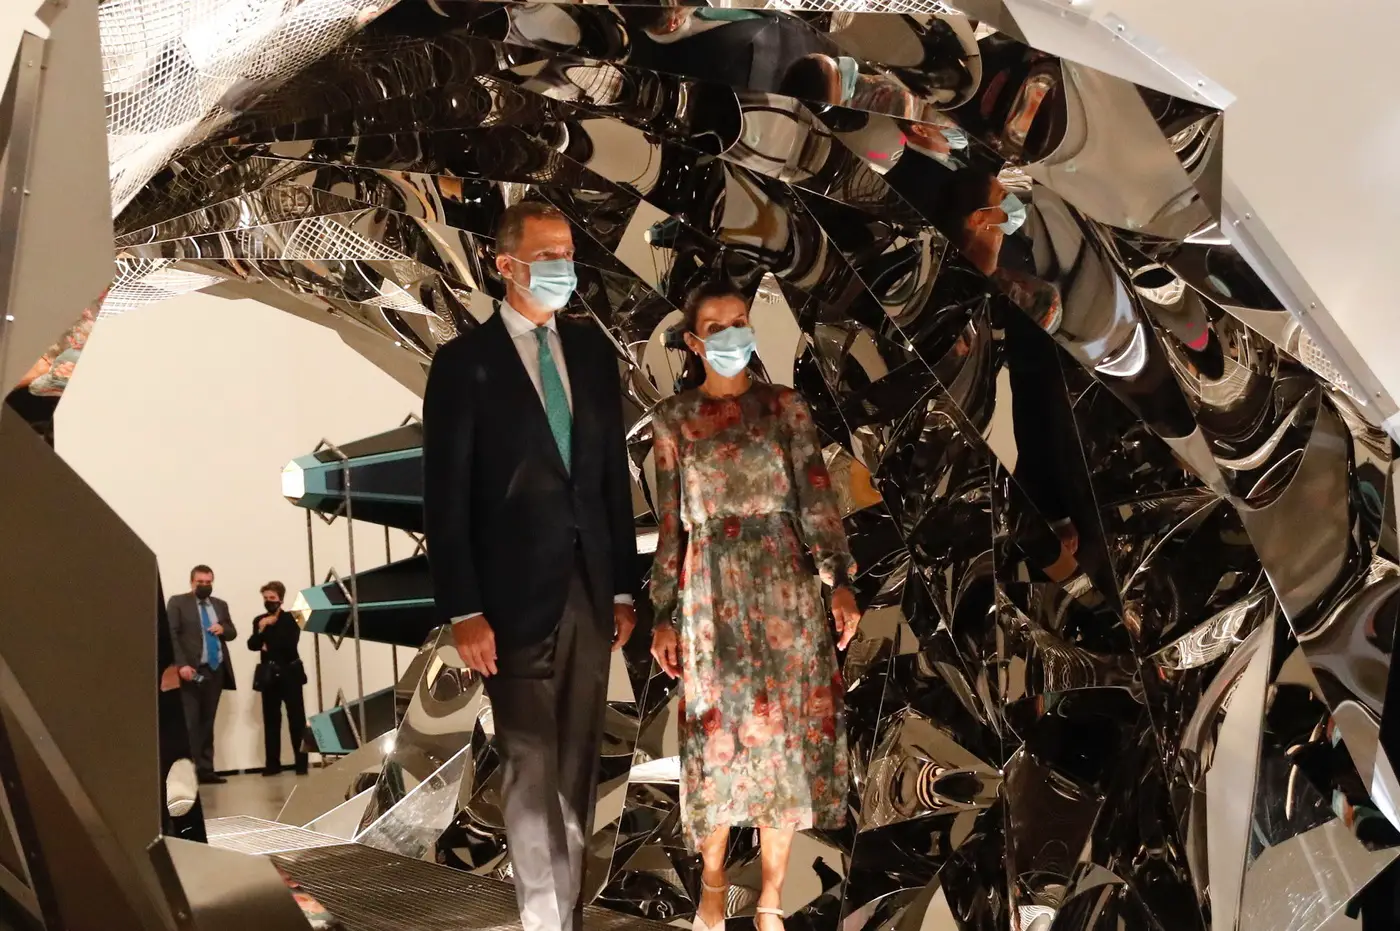 King Felipe and Queen Letizia of Spain at the Your vision expires (2002) by Olafur Eliasson